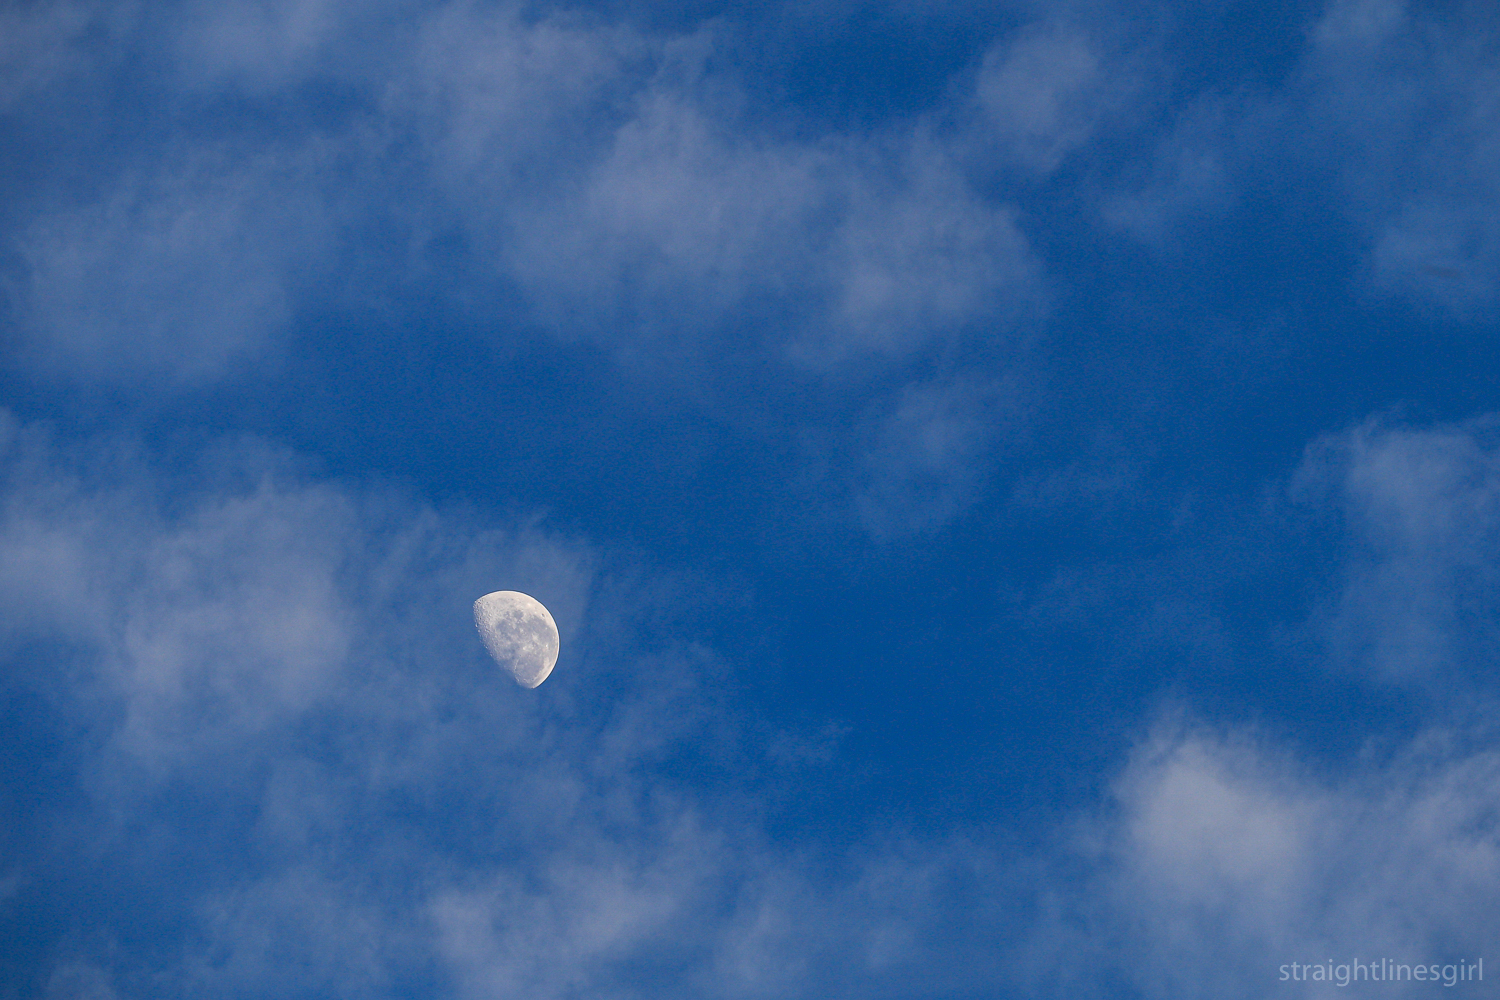 A waning moon in a blue sky with white clouds